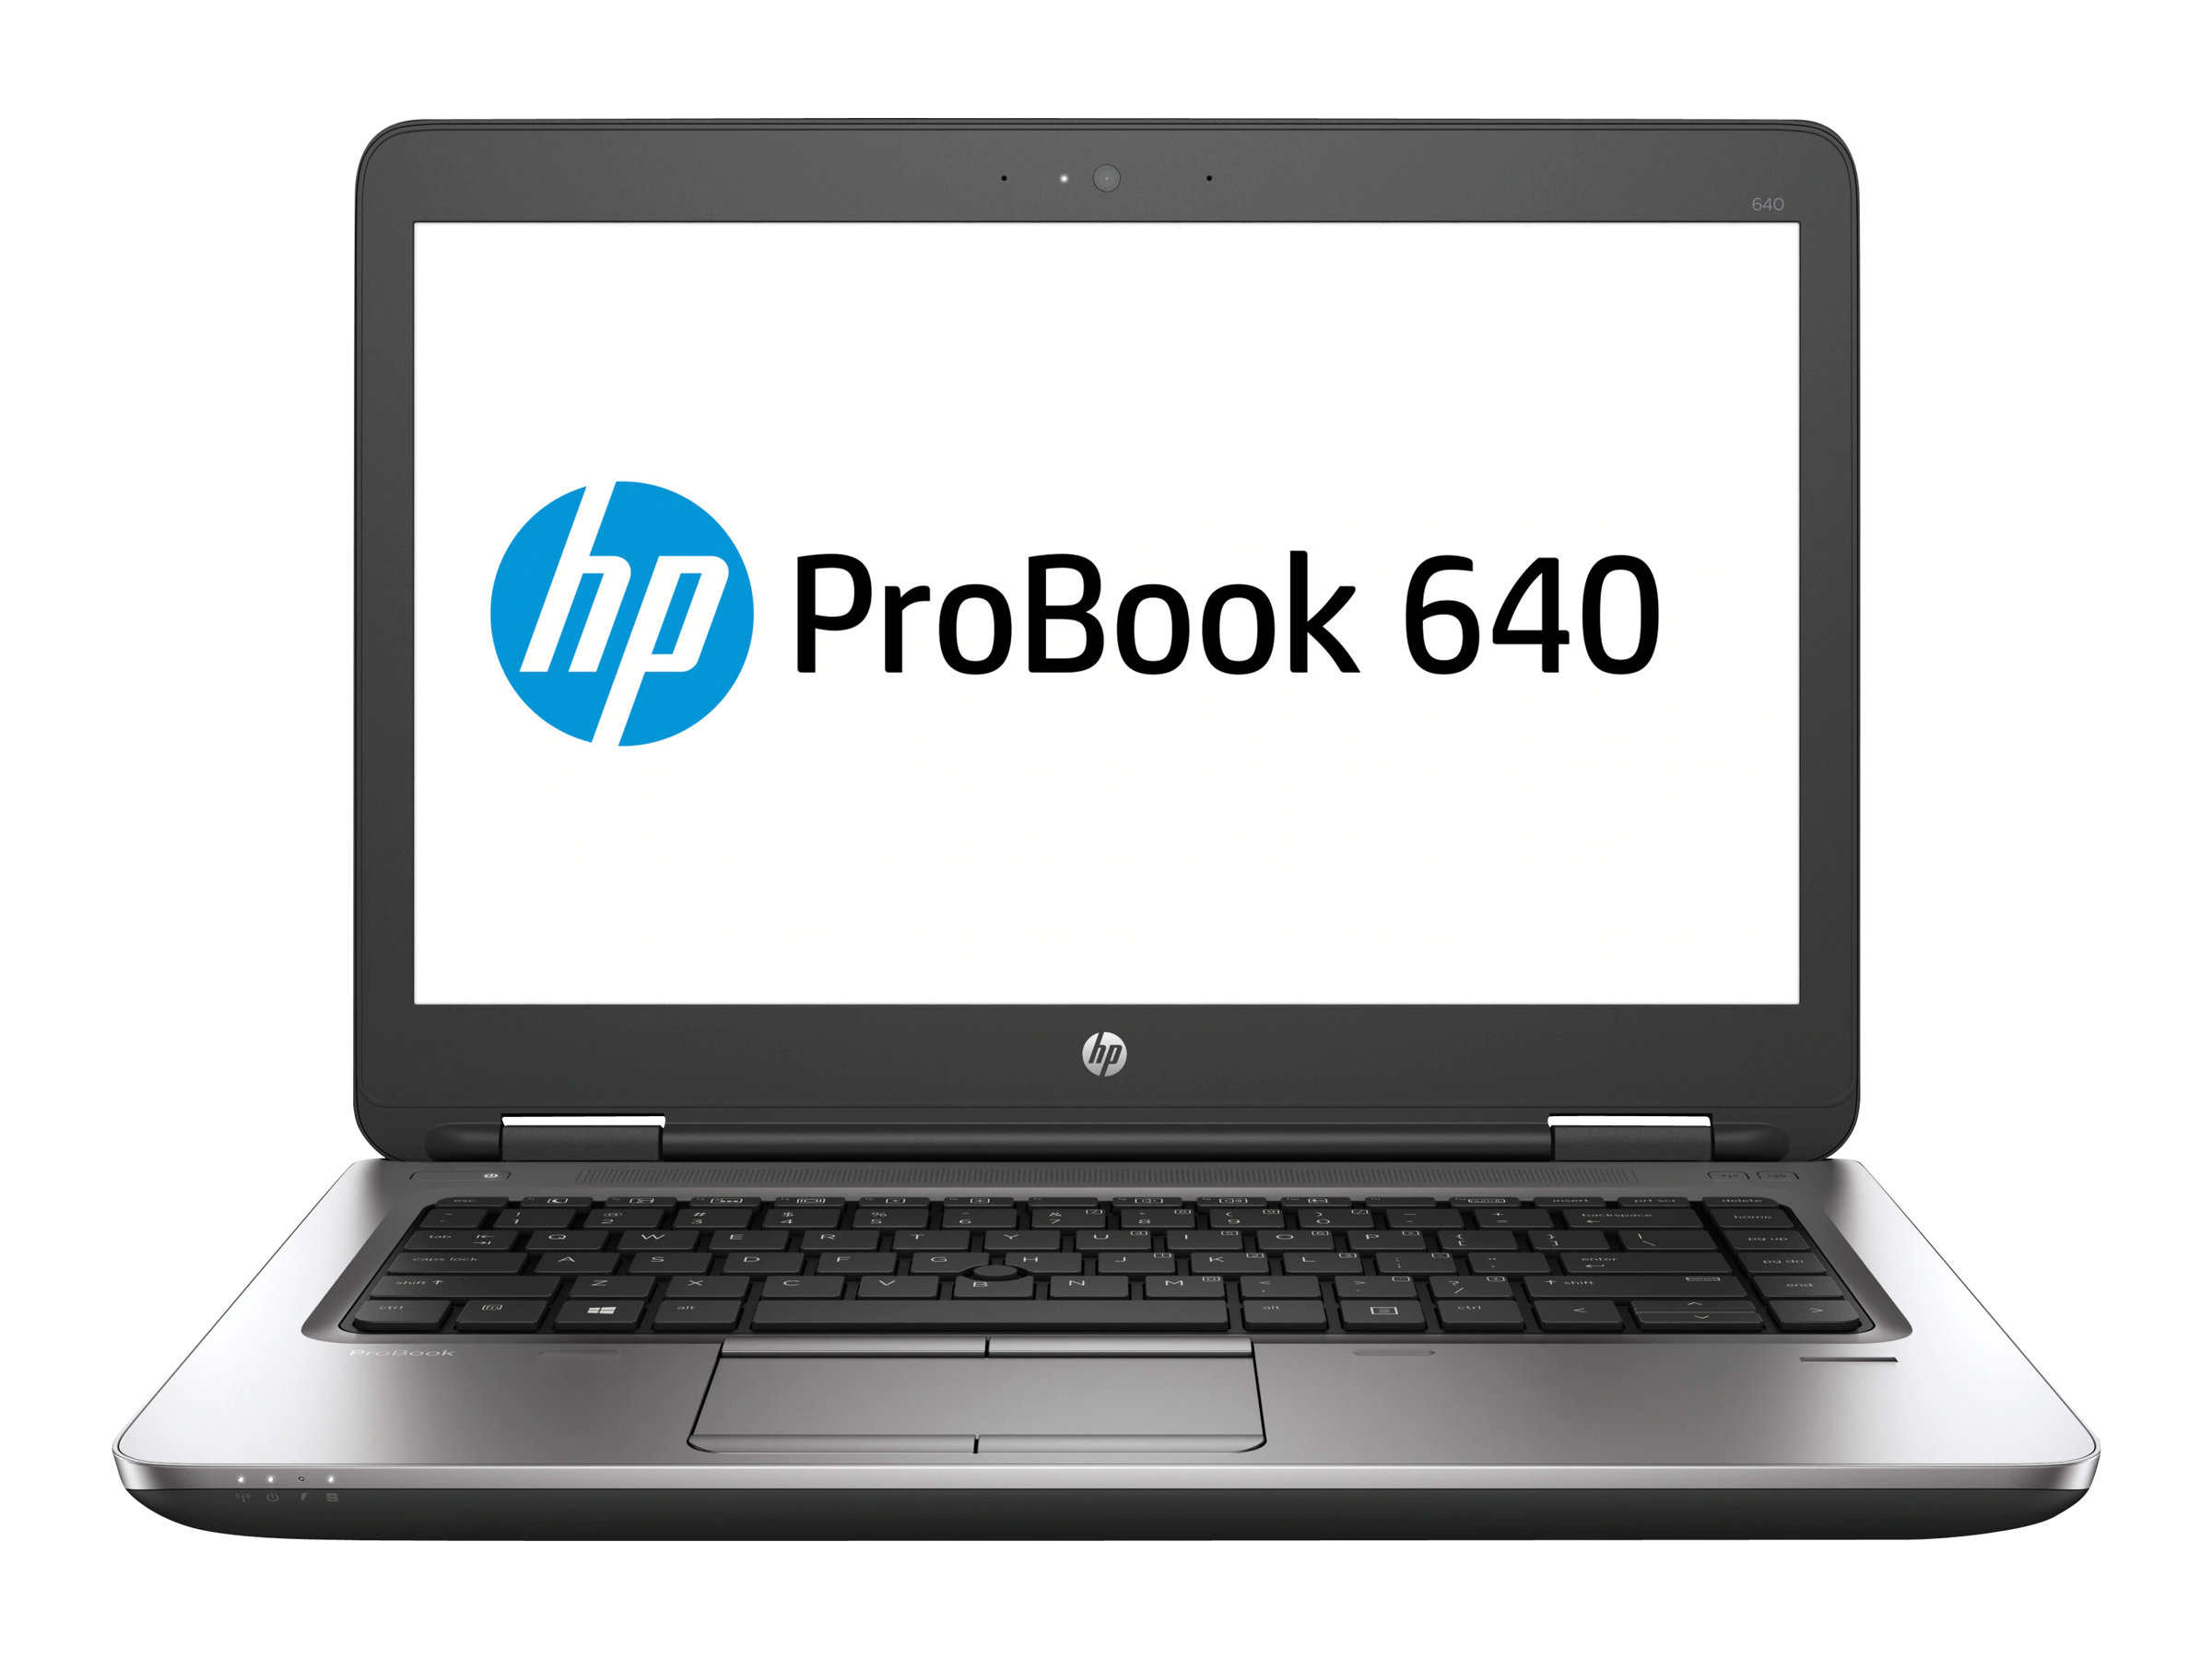 HP ProBook 430 G3 Notebook - full specs, details and review